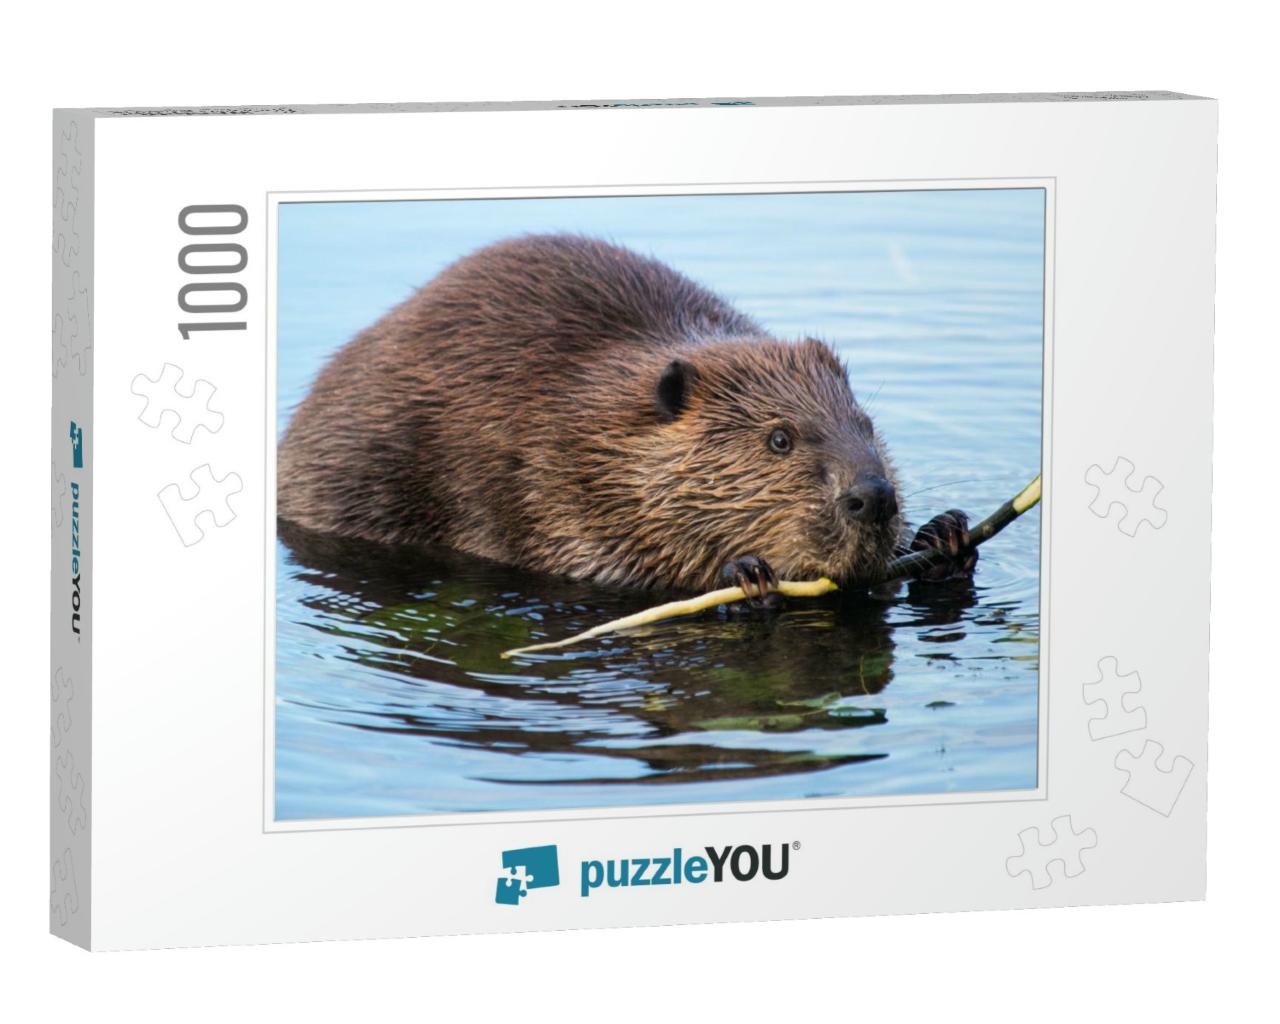 Beaver Munching on Some Bark At Dusk... Jigsaw Puzzle with 1000 pieces